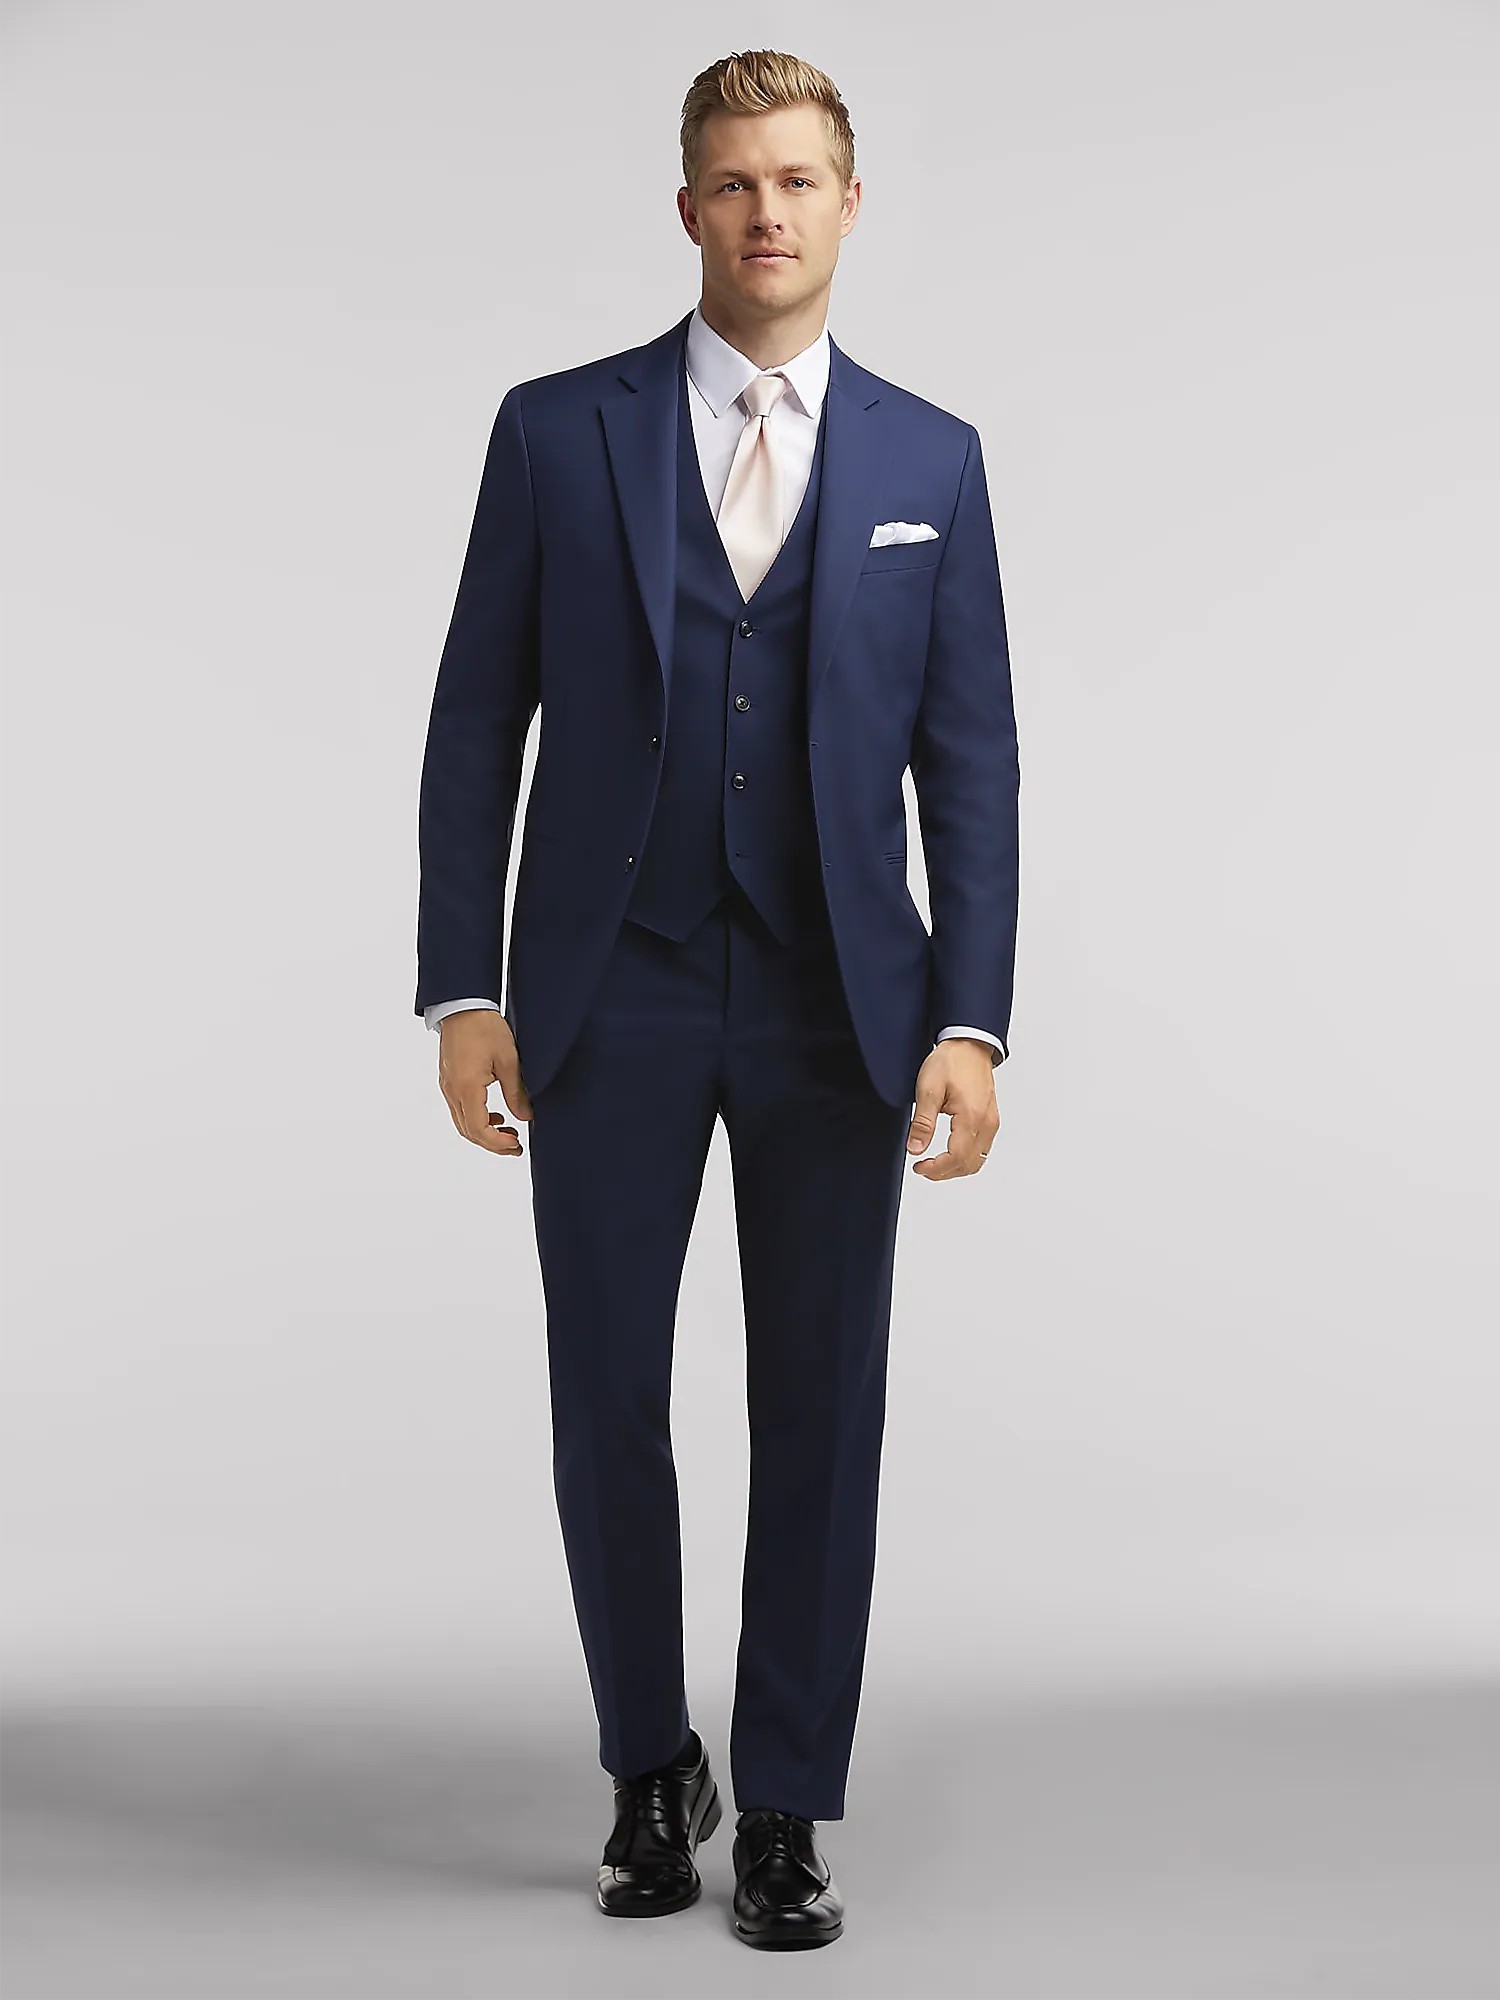 Top Formal Clothes Stores in Honolulu